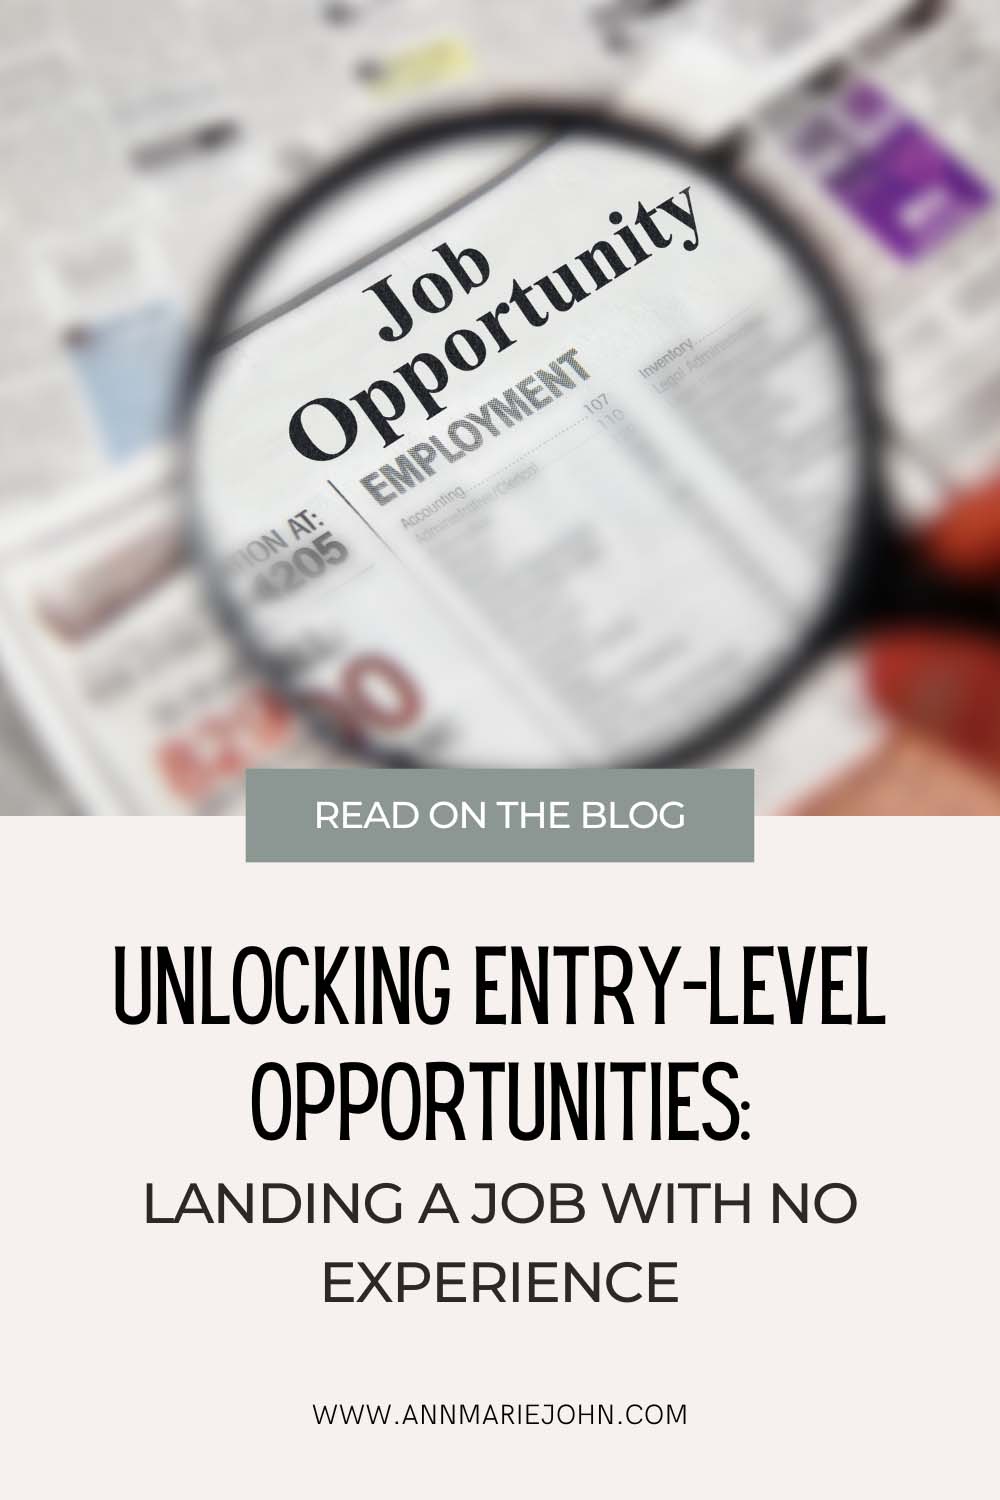 Landing a Job with No Experience